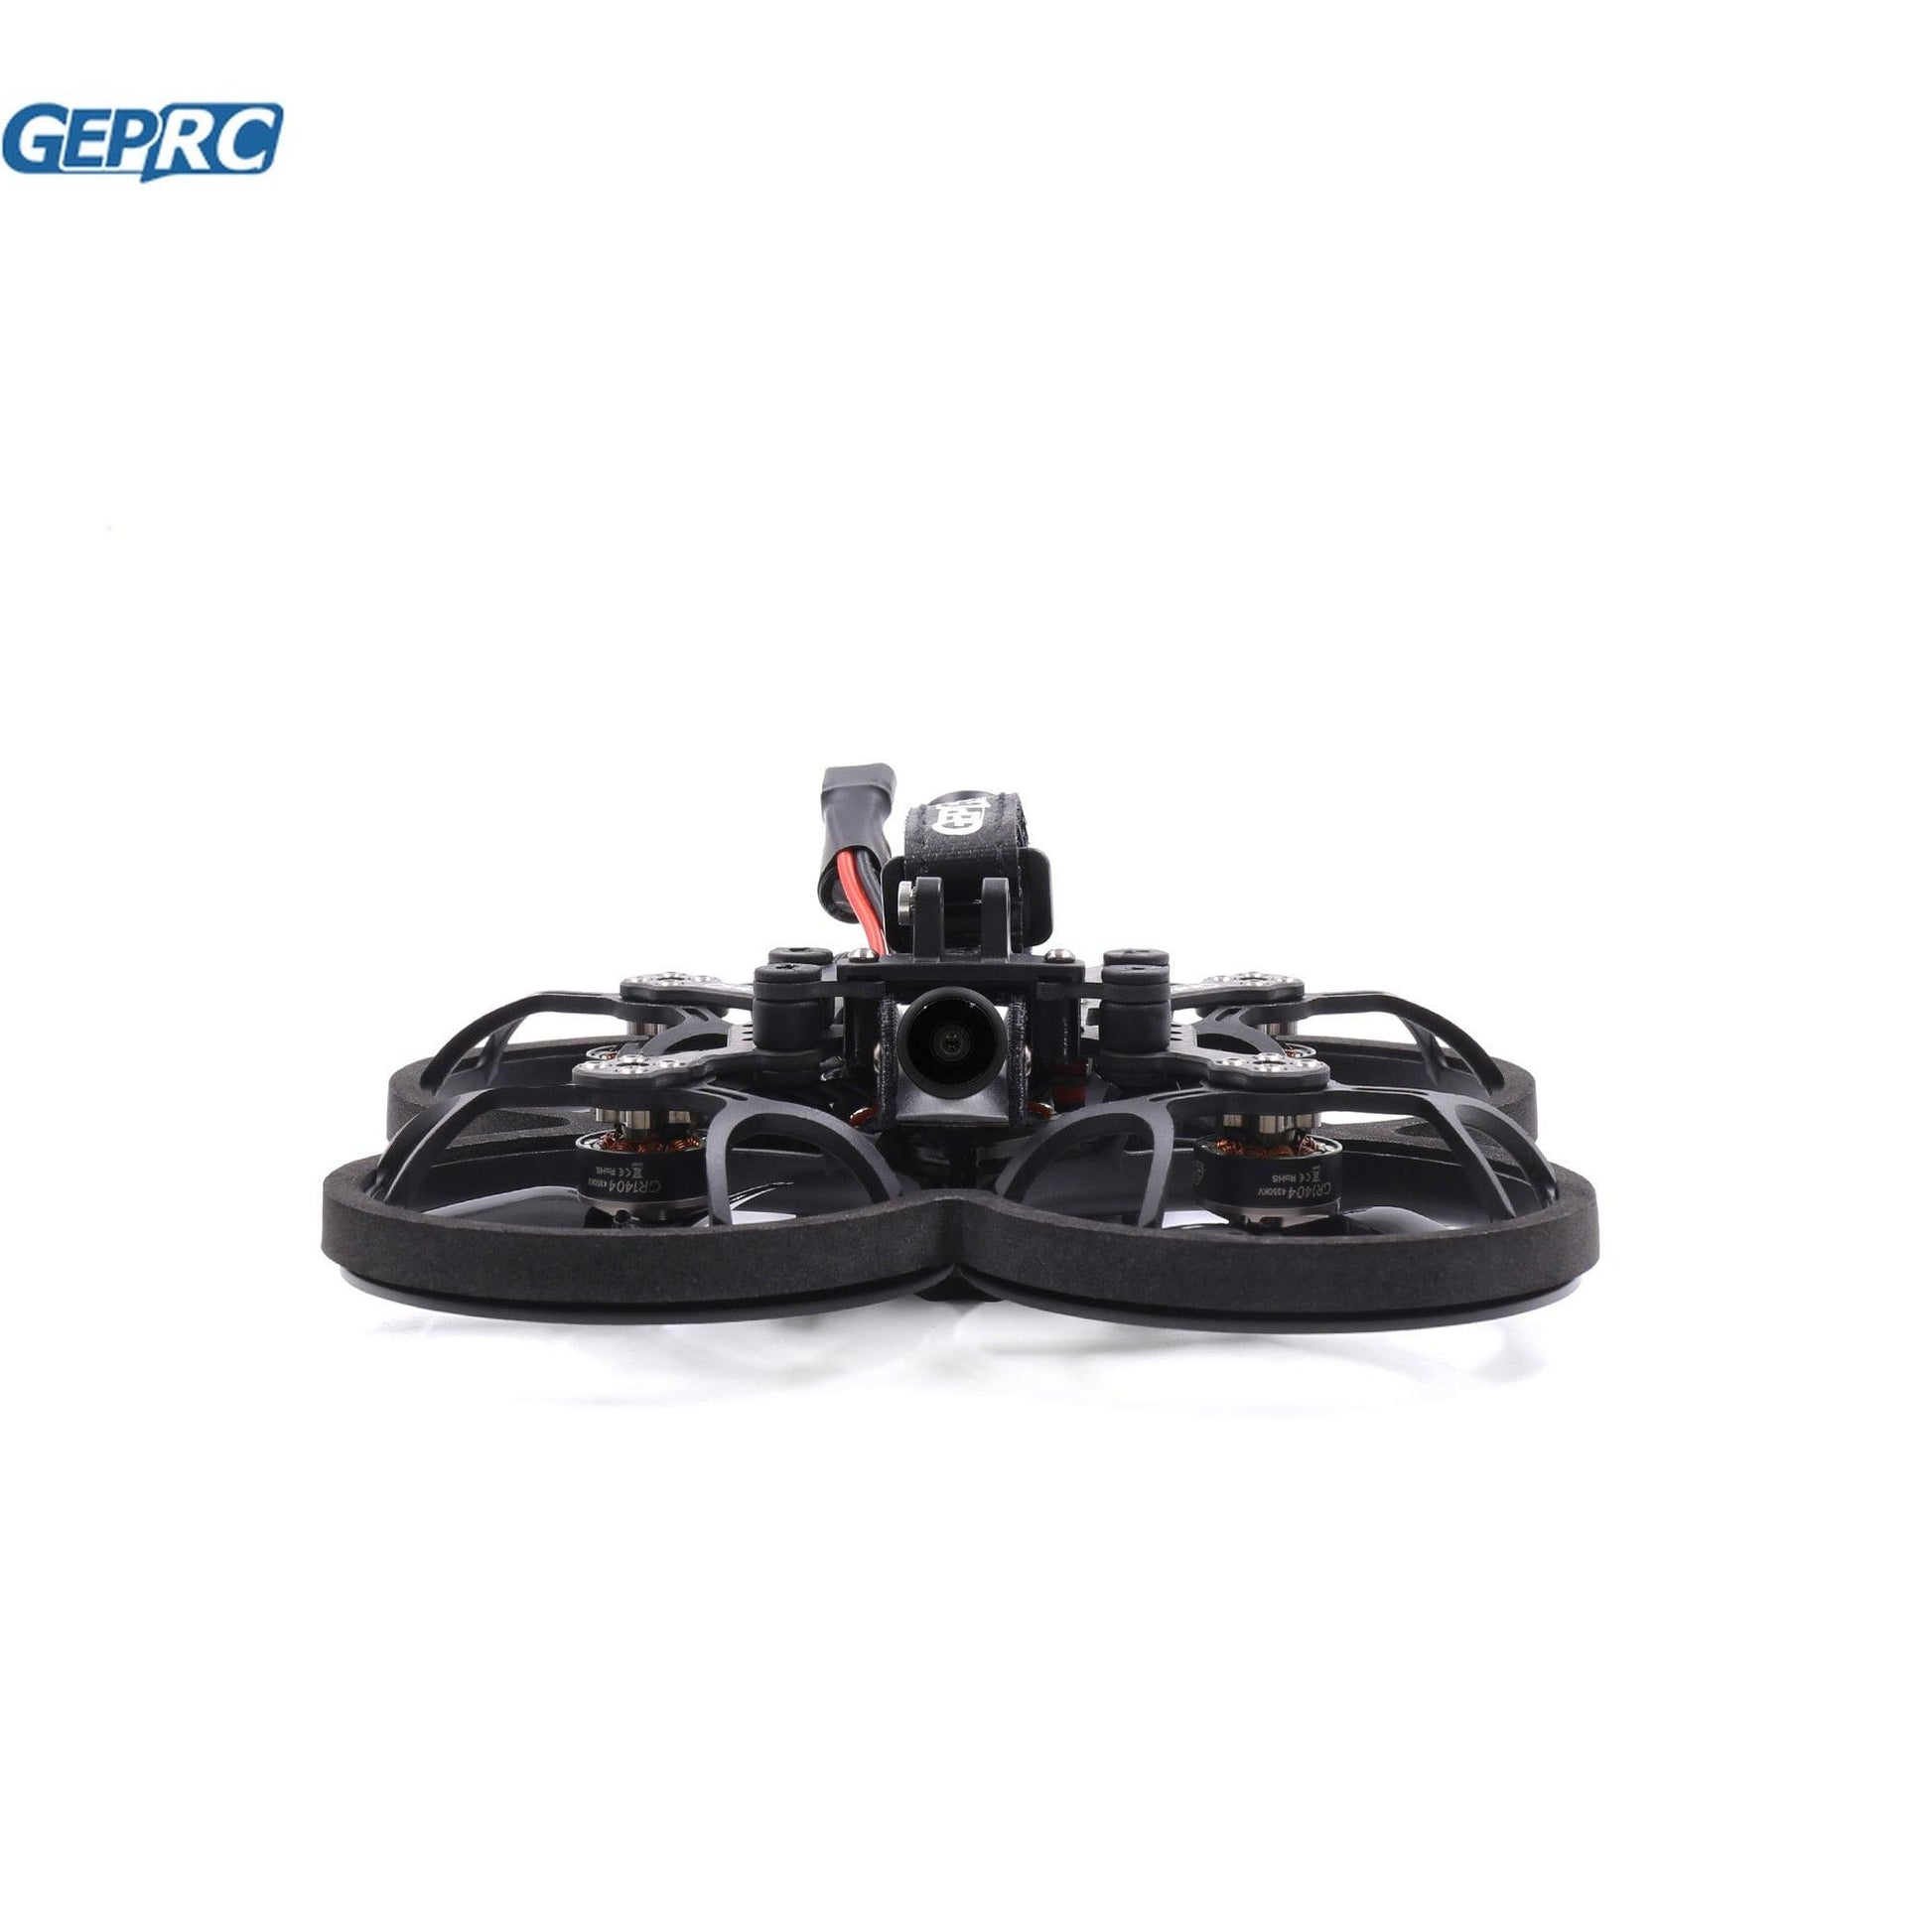 GEPRC CineLog 25 HD CineWhoop Racing Drone - WITH Polar Camera F411-35A AIO GR1404 4500kv For RC FPV Quadcopter Drone - RCDrone